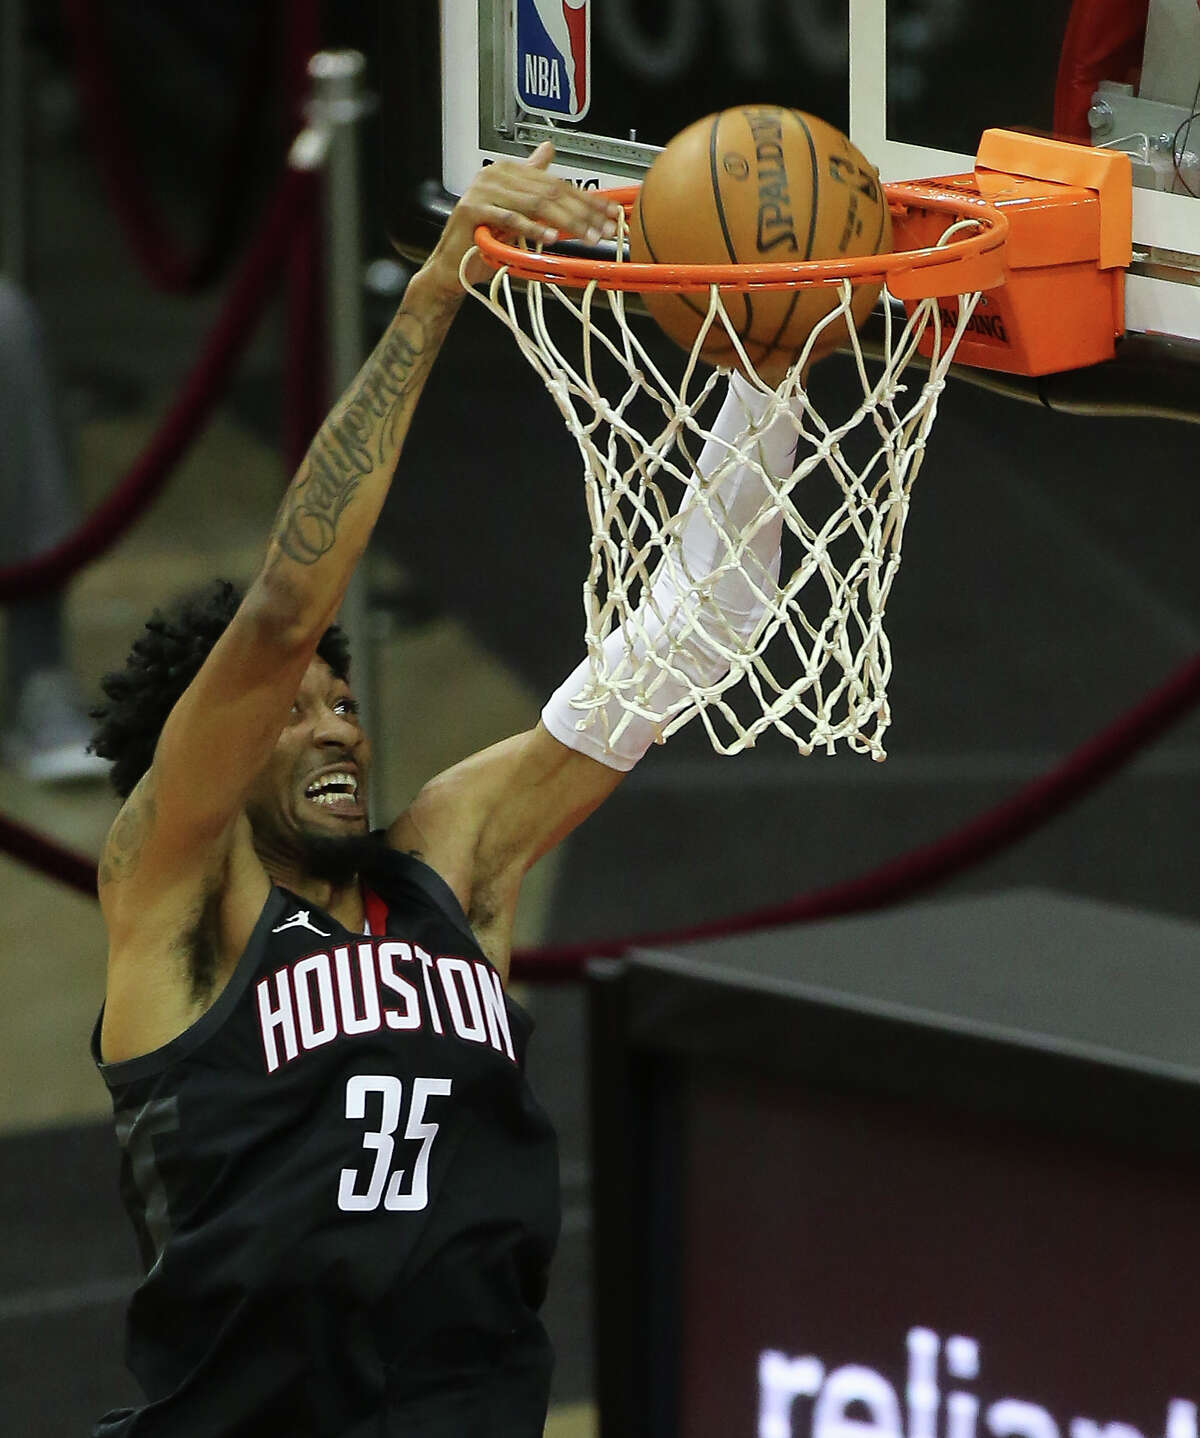 Houston Rockets forward Christian Wood (35) dunks the ball with a relay from James Harden during the third quarter of a NBA game against the Dallas Mavericks Monday, Jan. 4, 2021, at Toyota Center in Houston.